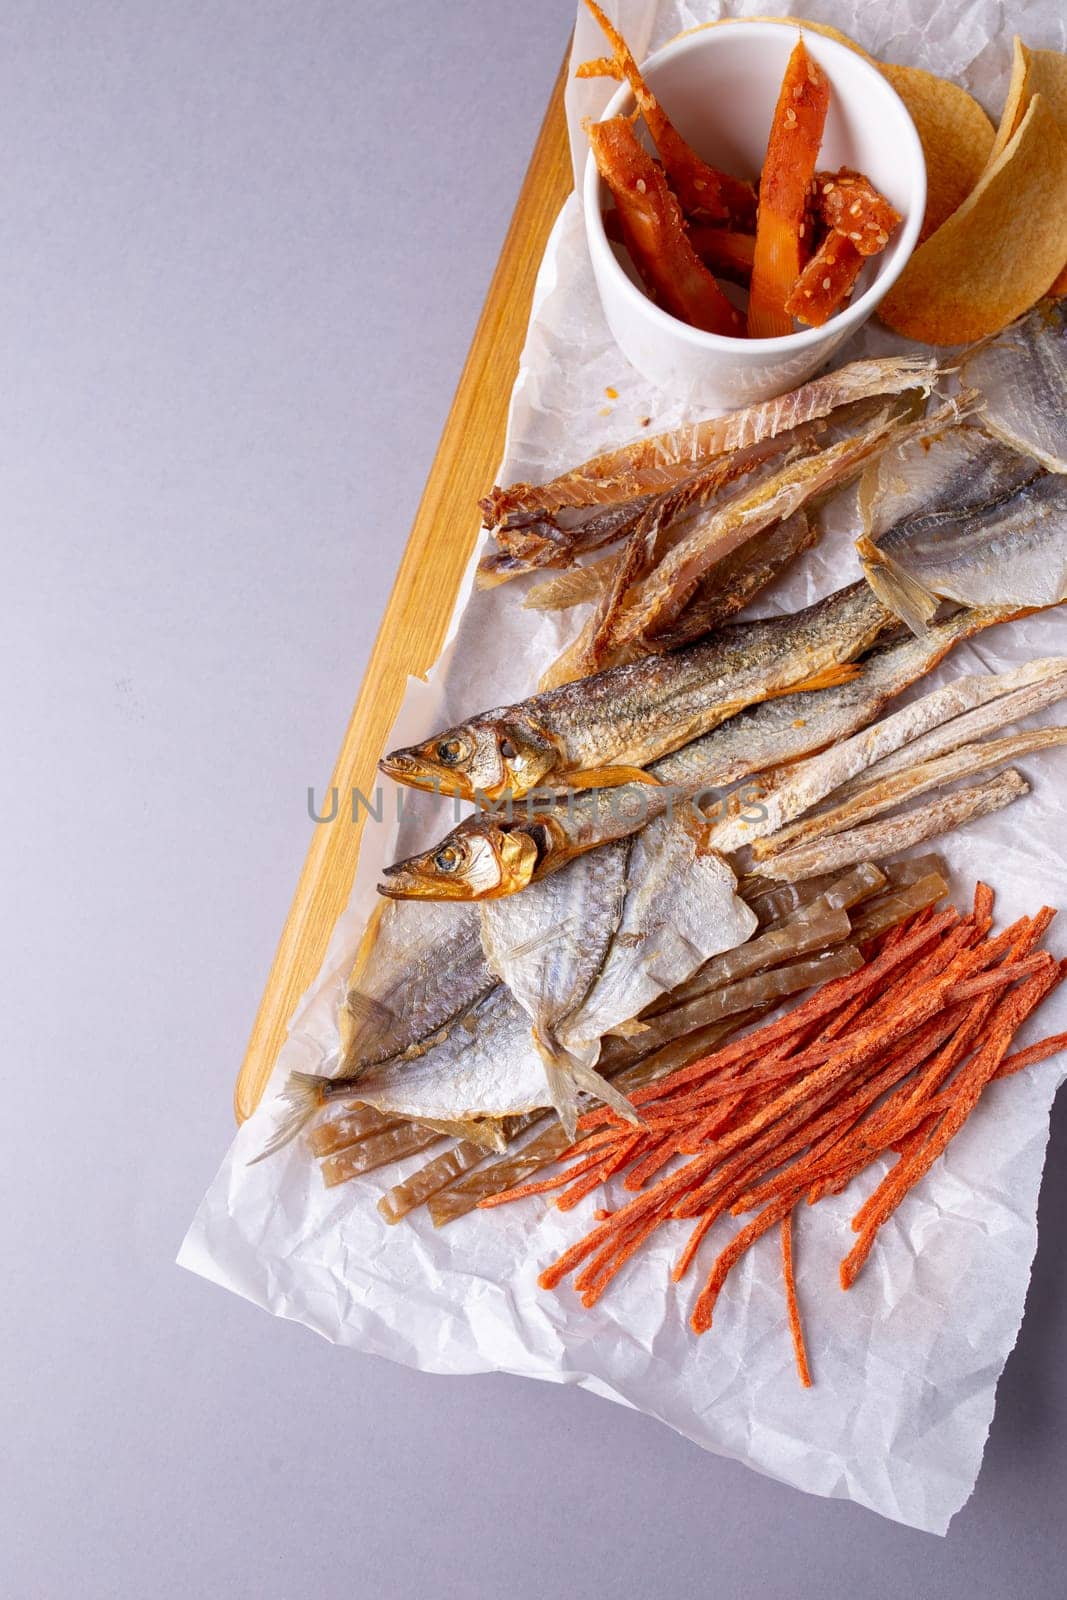 Assorted dried fish, fish skin, and fruit snacks on white paper on a wooden table, creating a vibrant culinary display.